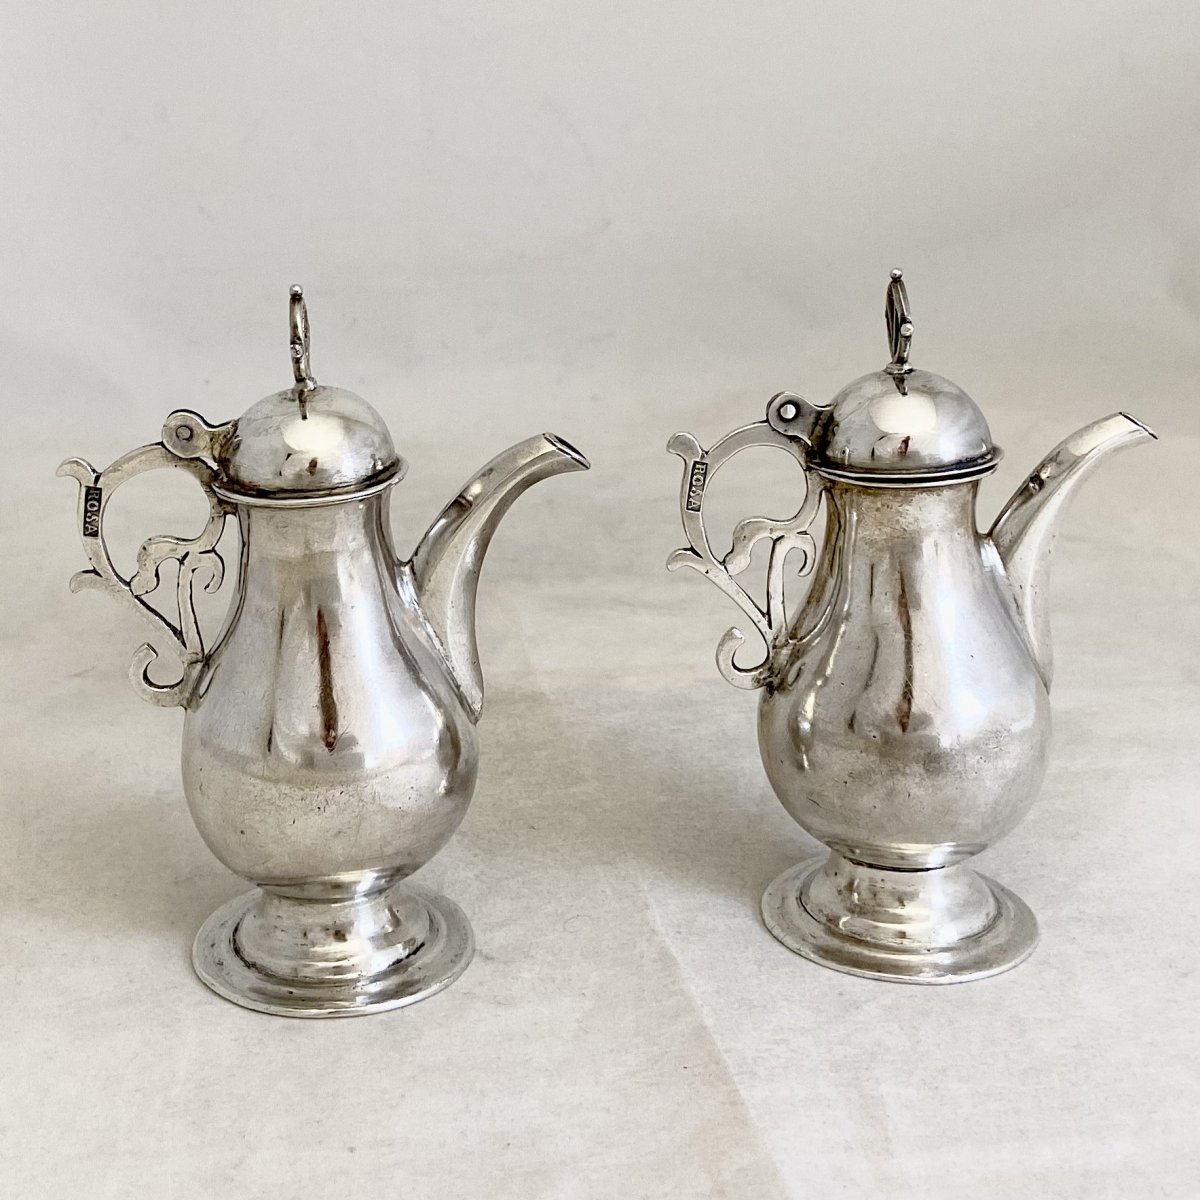 Pair Of Burettes, Spain 1680-1730, Sterling Silver, Silversmith Rosa, Pair Of Bulbs